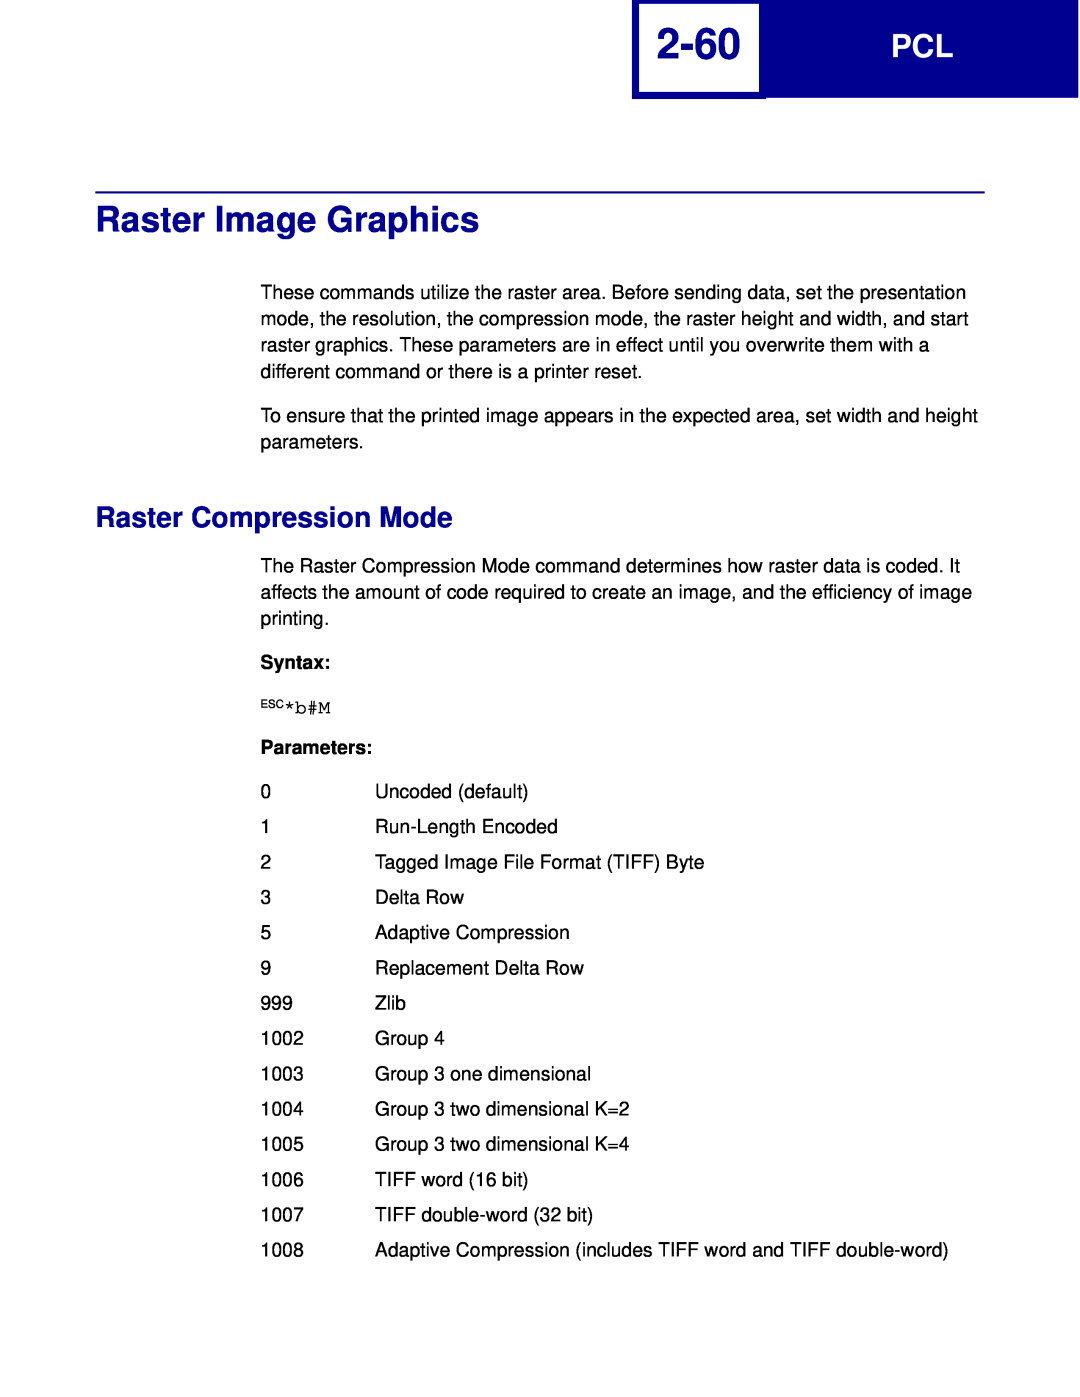 Lexmark C760, C762 manual 2-60, Raster Image Graphics, Raster Compression Mode, Syntax, Parameters 